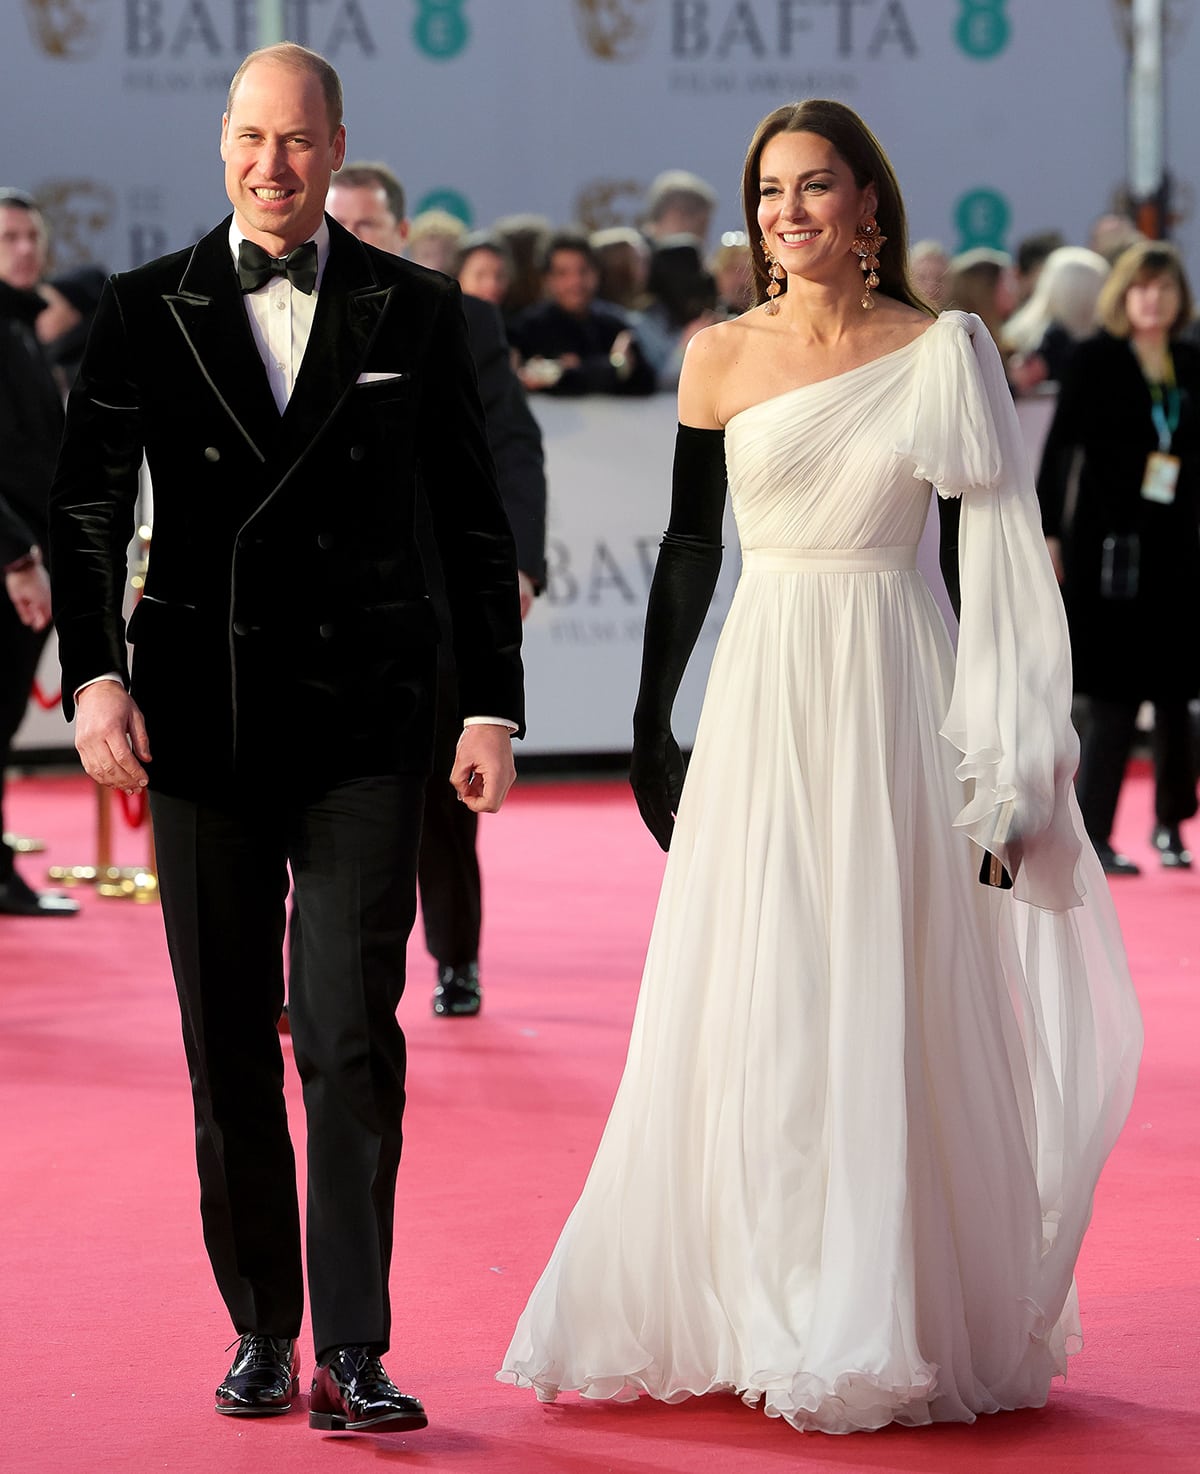 Prince William coordinates with his wife in a black velvet tuxedo by Tom Ford